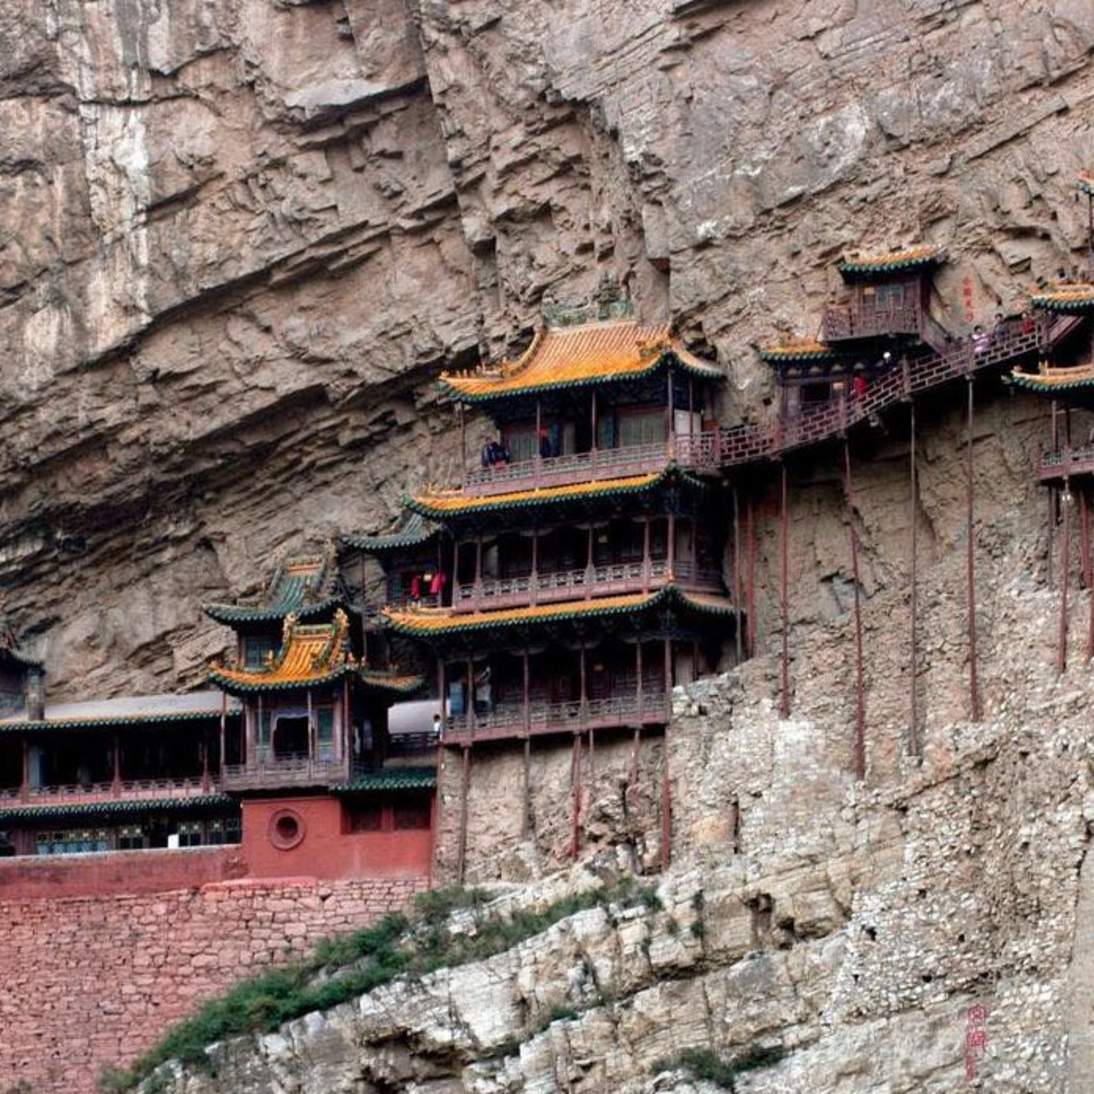 Image of buildings attached to a cliff face